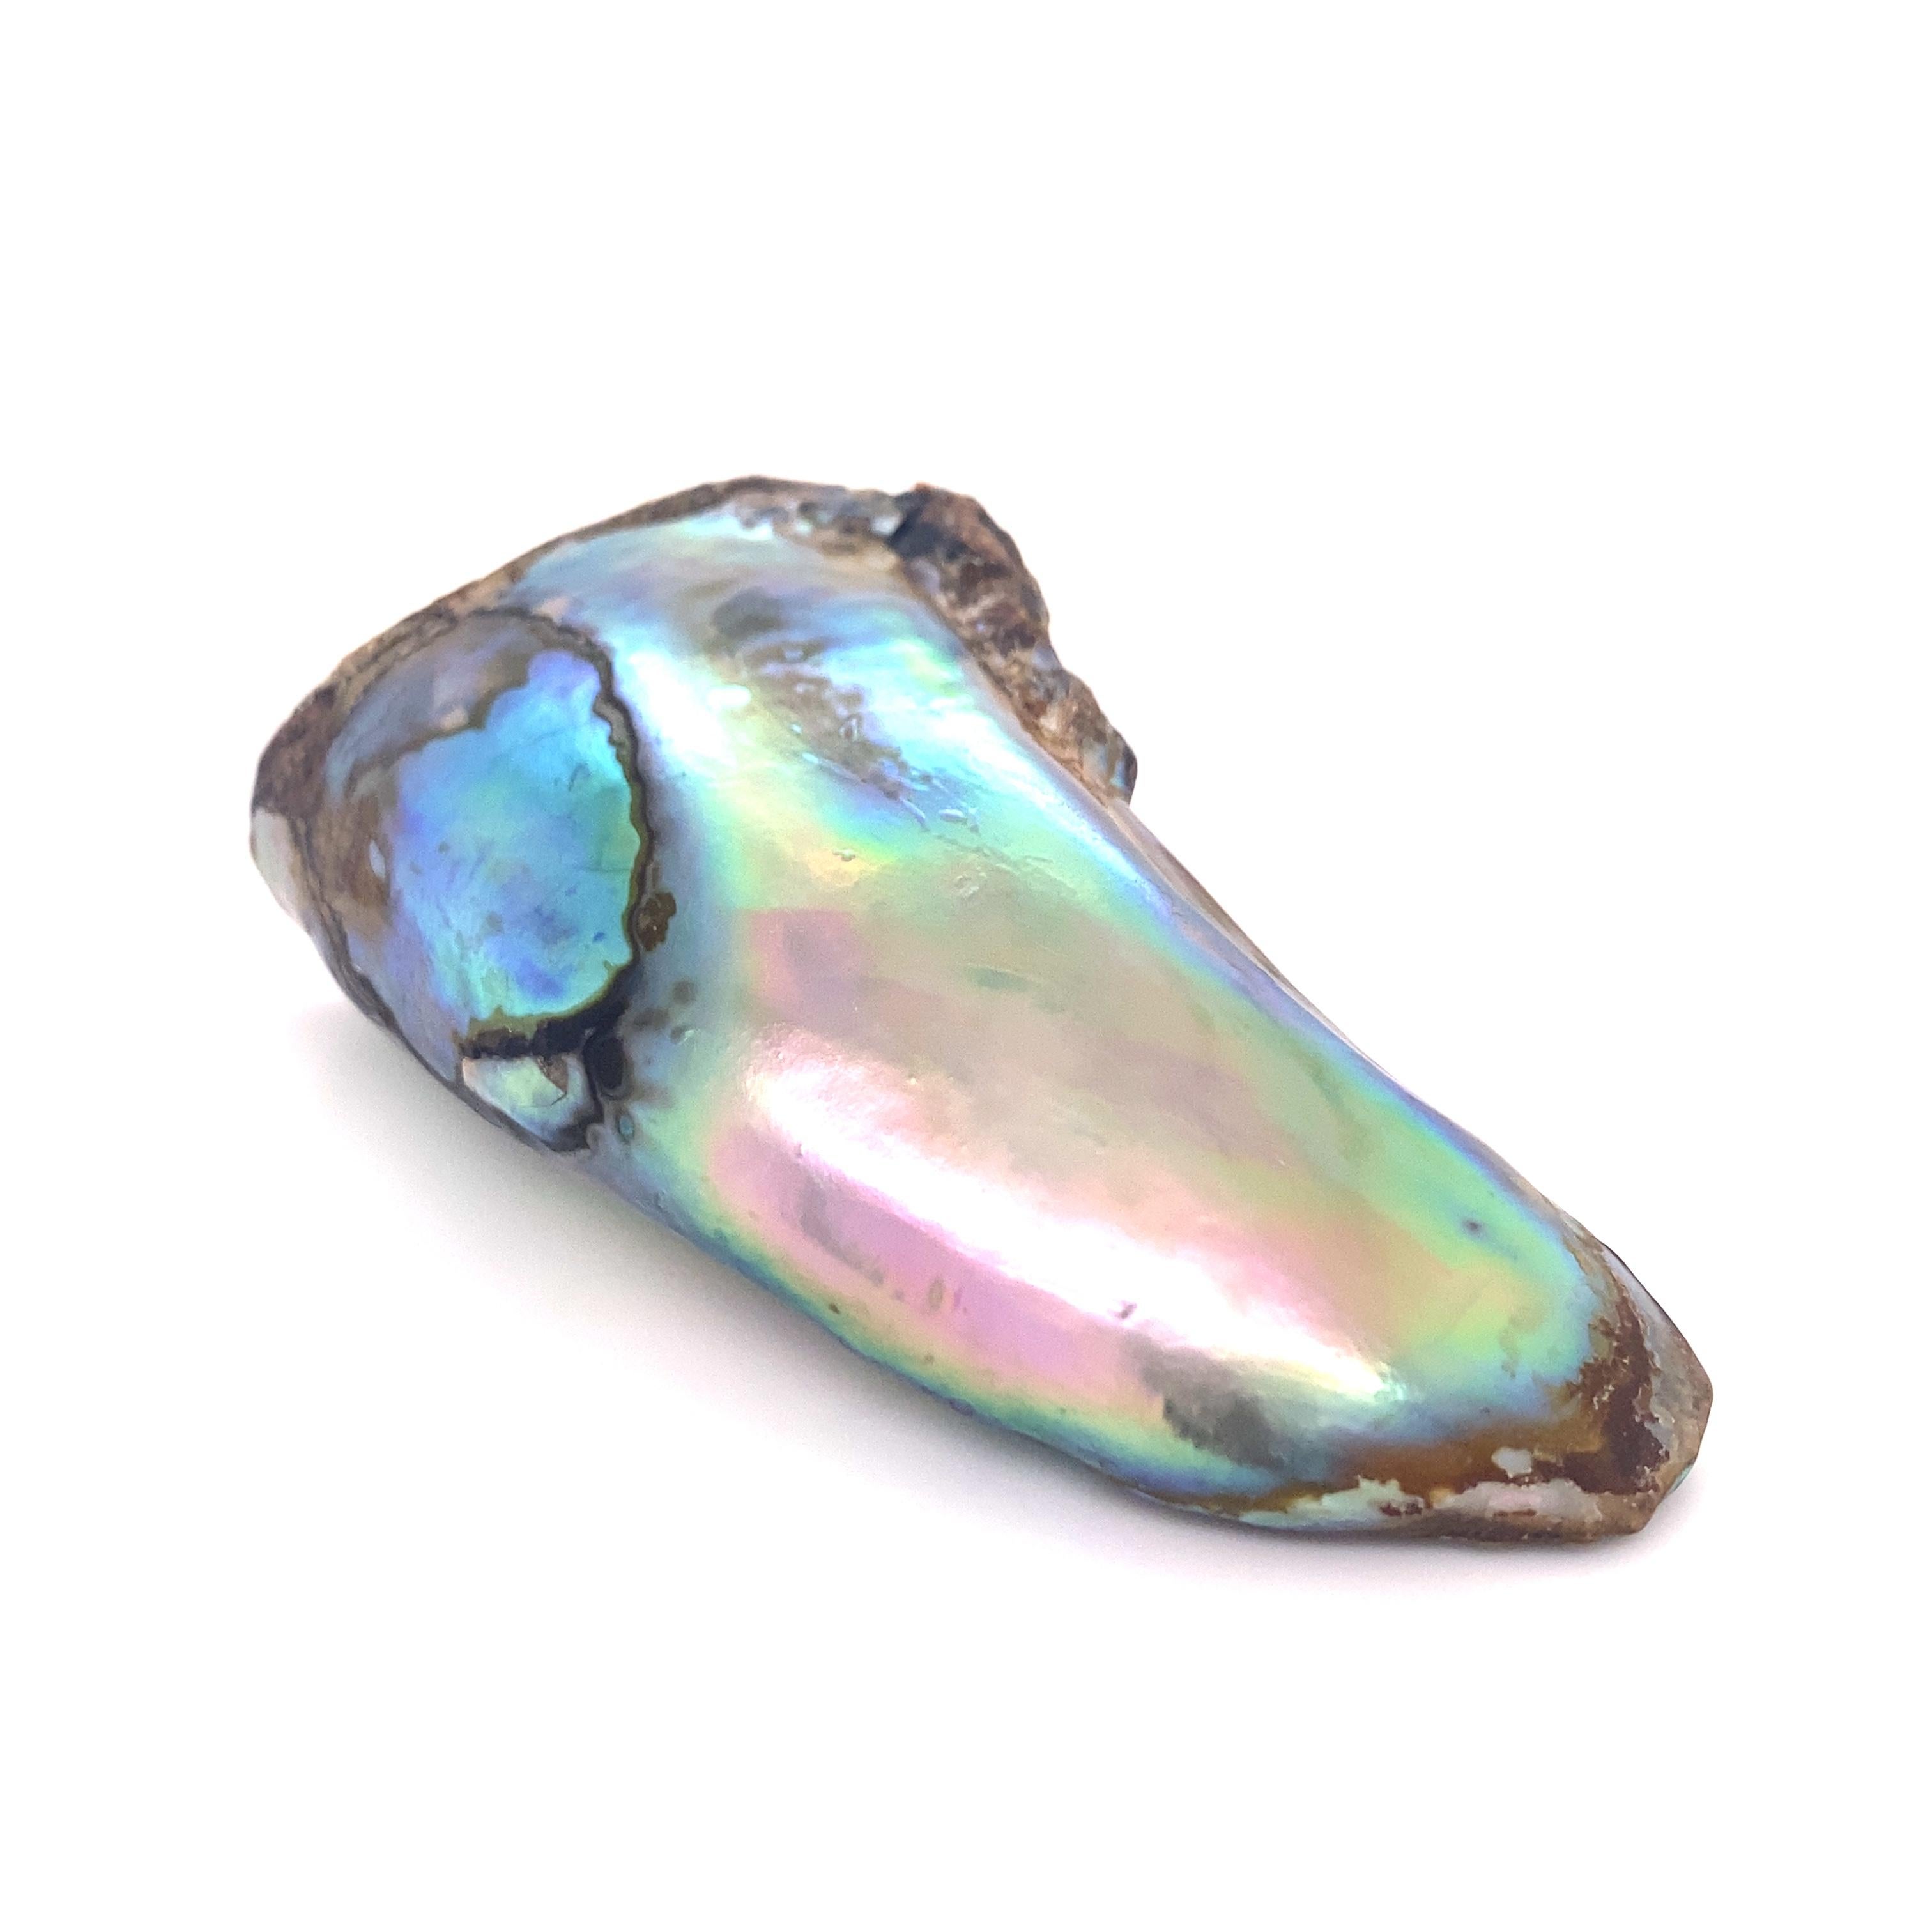 Abalone, also called Paua, is a variety of marine snail, also called a marine gastropod mollusk. It’s famous for its amazing iridescent colors, which appear once the shell has been cleaned and polished. From all the mollusks that produce pearls